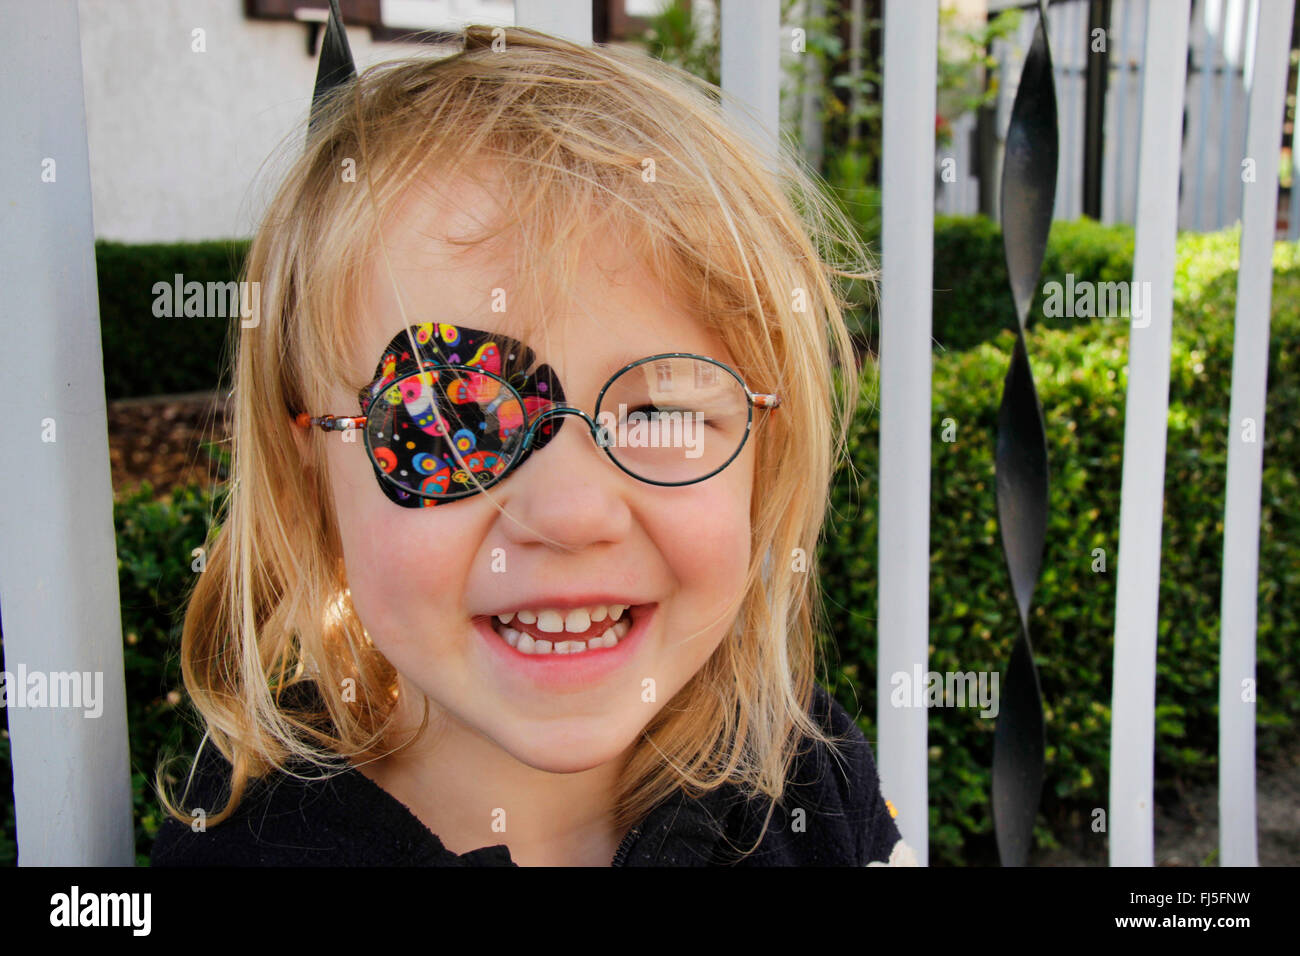 little girl with eyepatch, portrait of a child Stock Photo